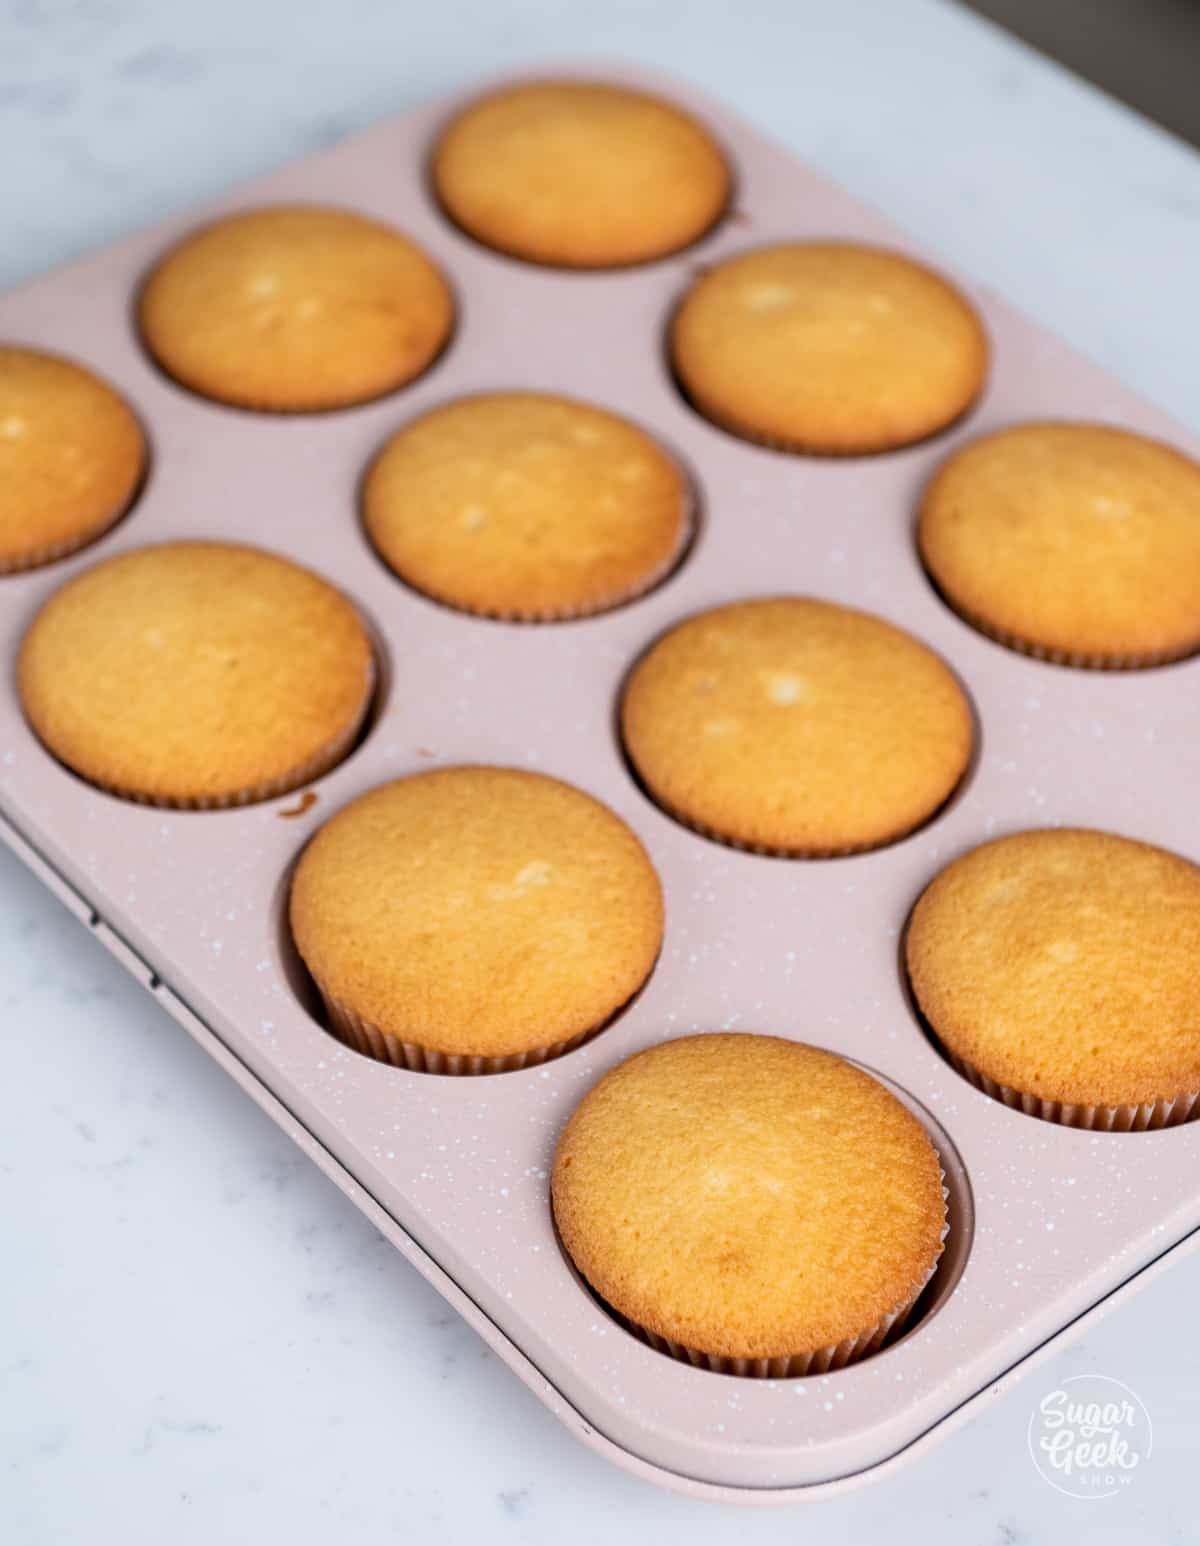 finished baked vanilla cupcakes in the cupcake pan.